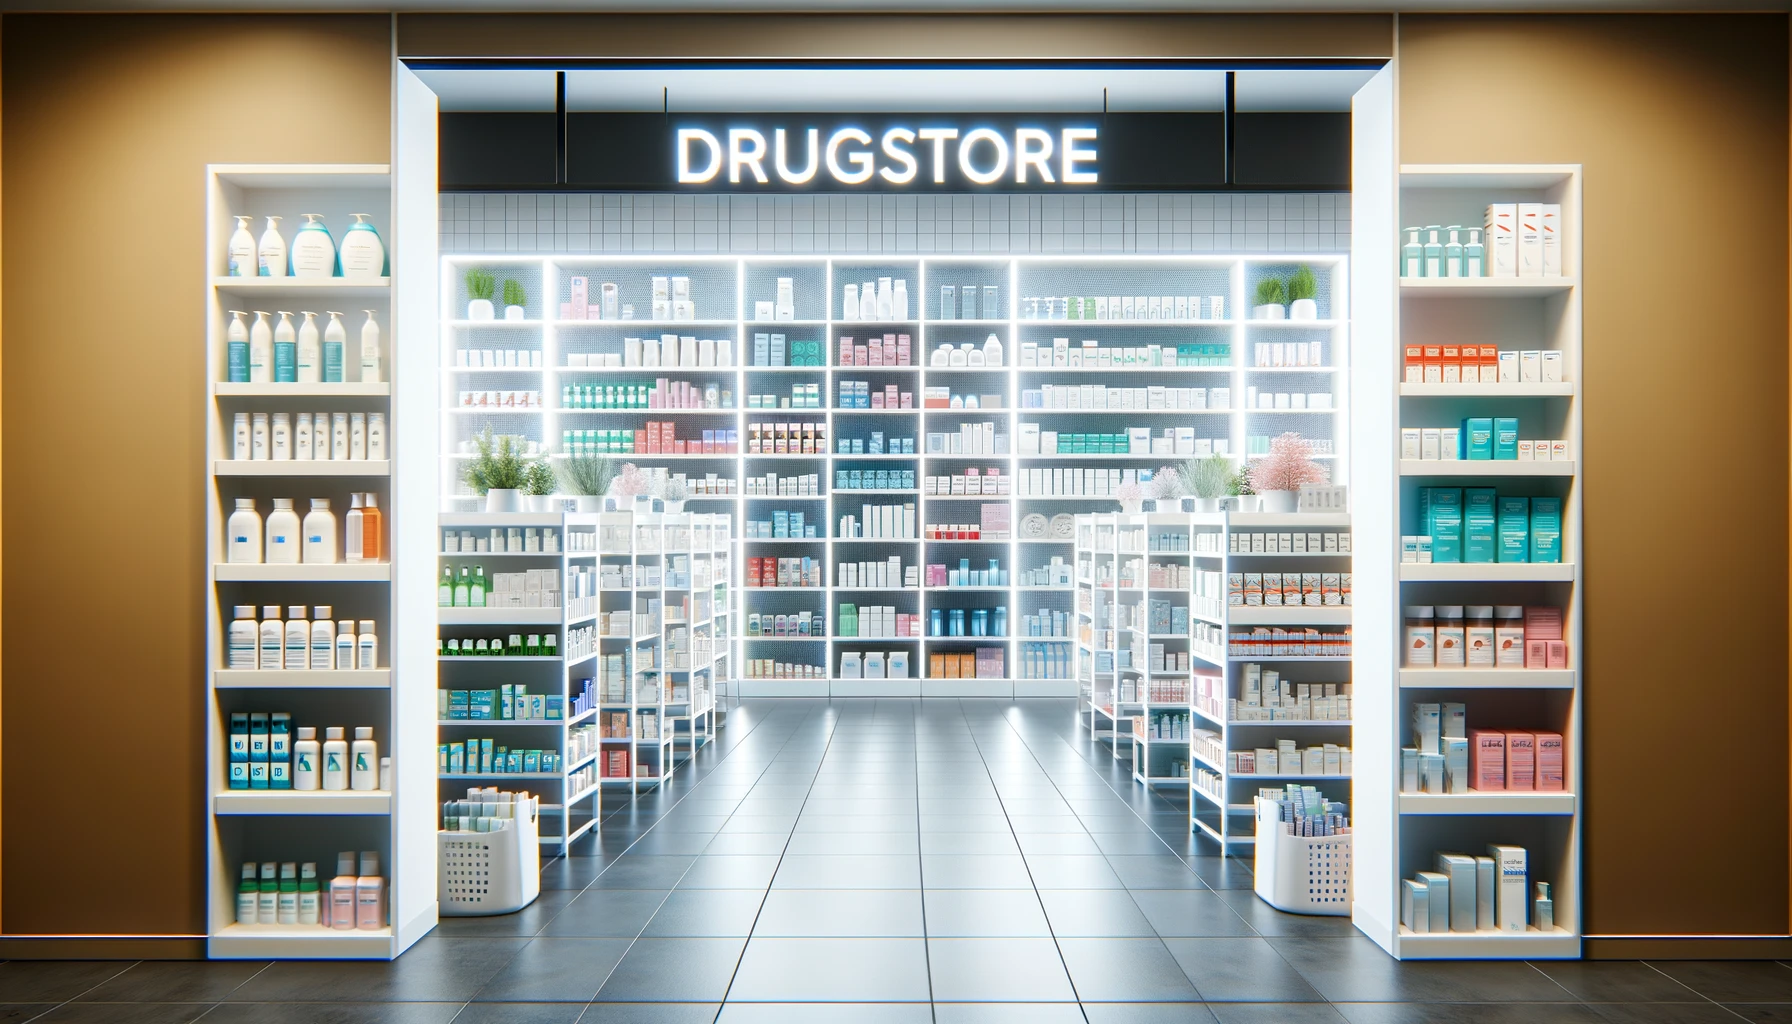  A modern drugstore aisle stocked with health products and medicines, as featured on Healthy Life - New Start.